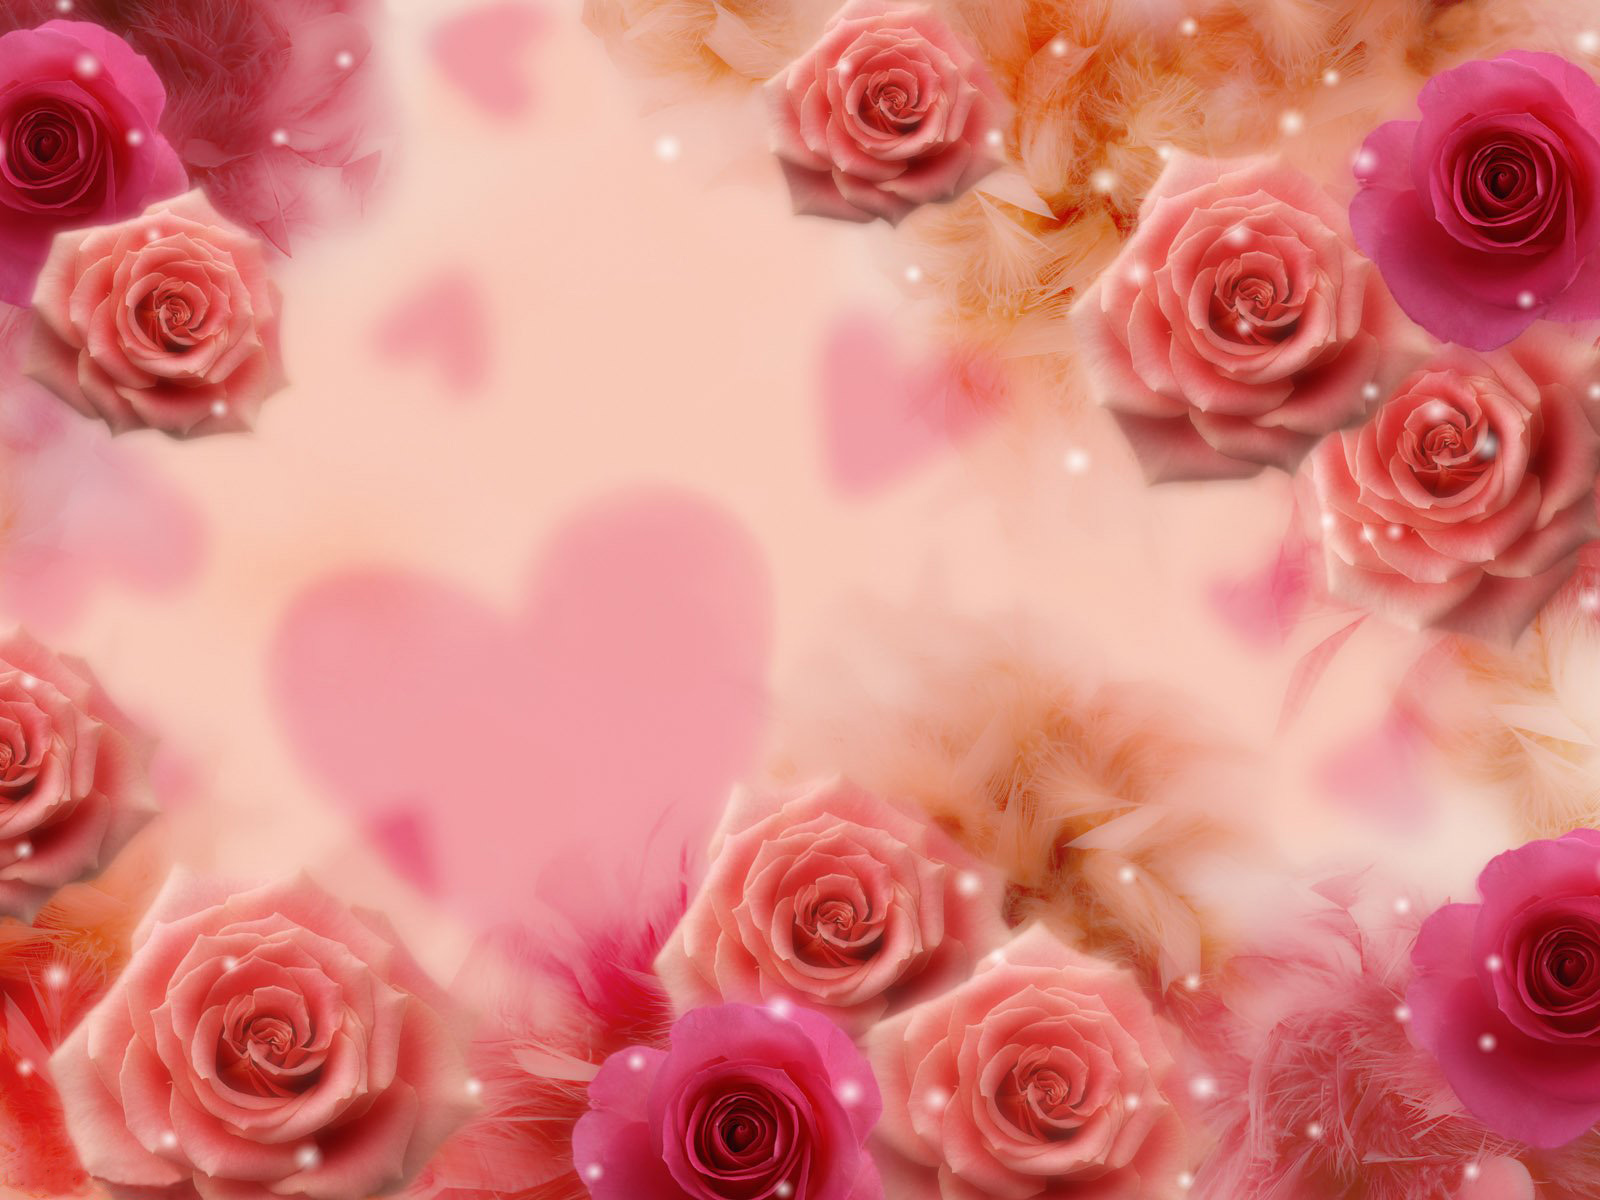 Download Roses And Hearts Gallery Yopriceville High Quality Images And Transparent Png Free Clipart